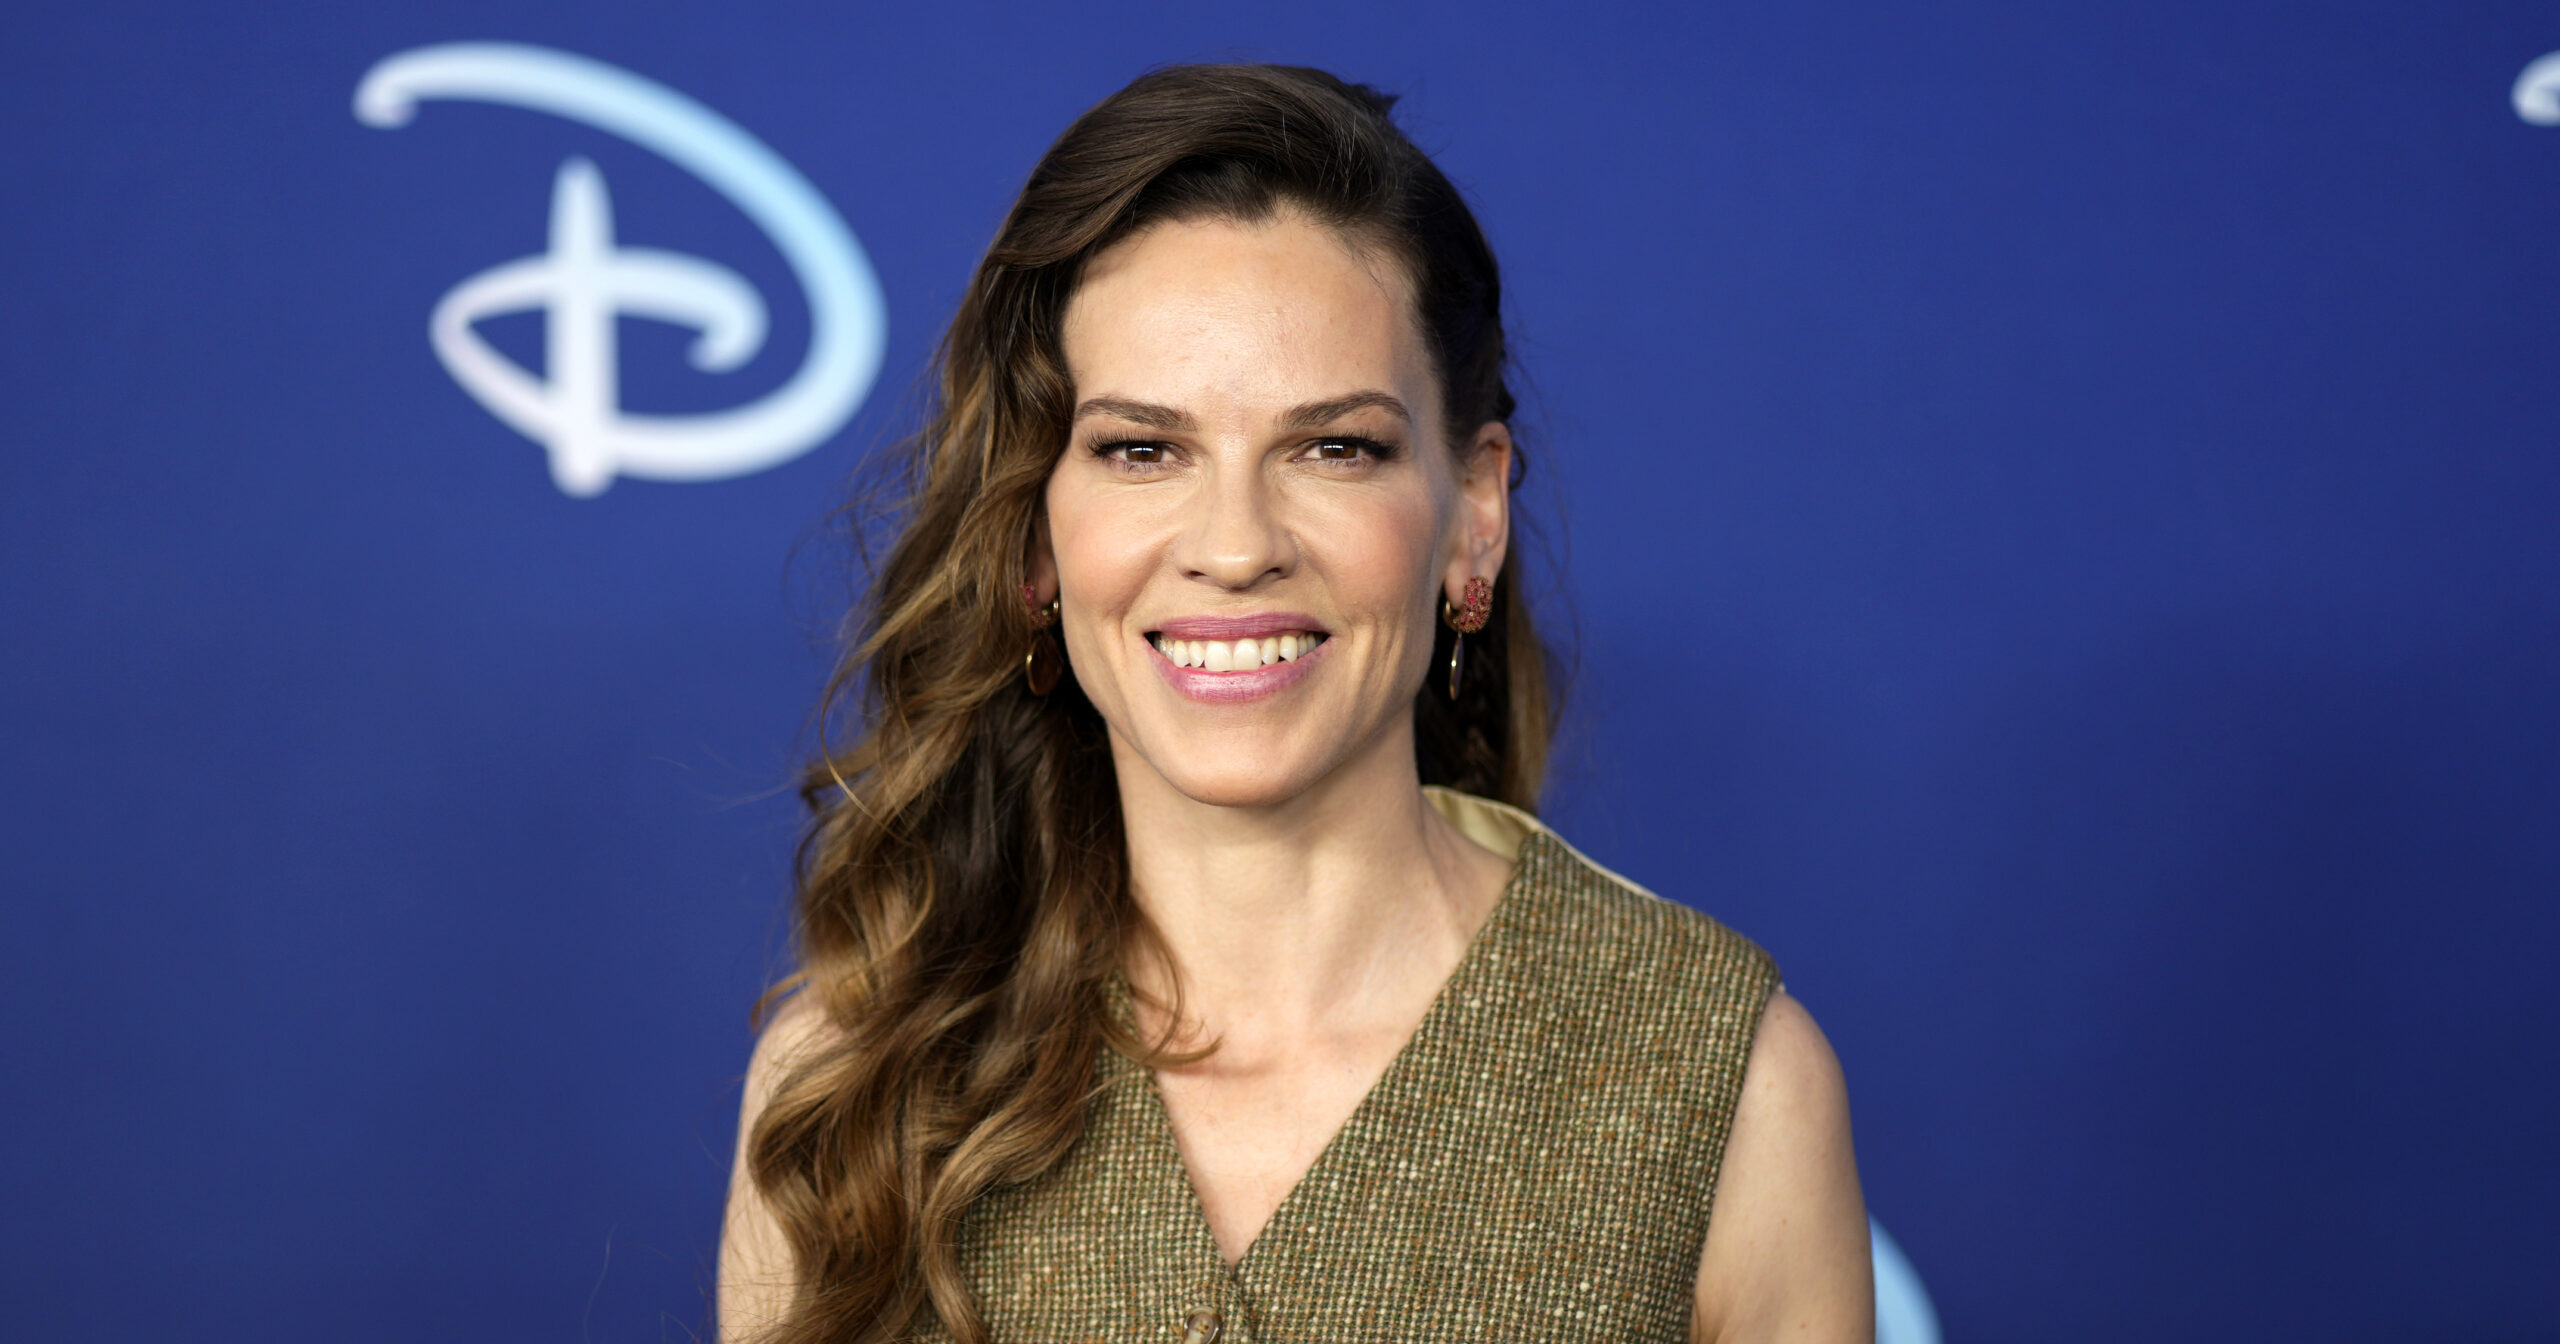 Hilary Swank attends the Disney 2022 Upfront presentation at Basketball City Pier 36 on Tuesday, May 17, 2022, in New York. (Photo by Charles Sykes/Invision/AP)